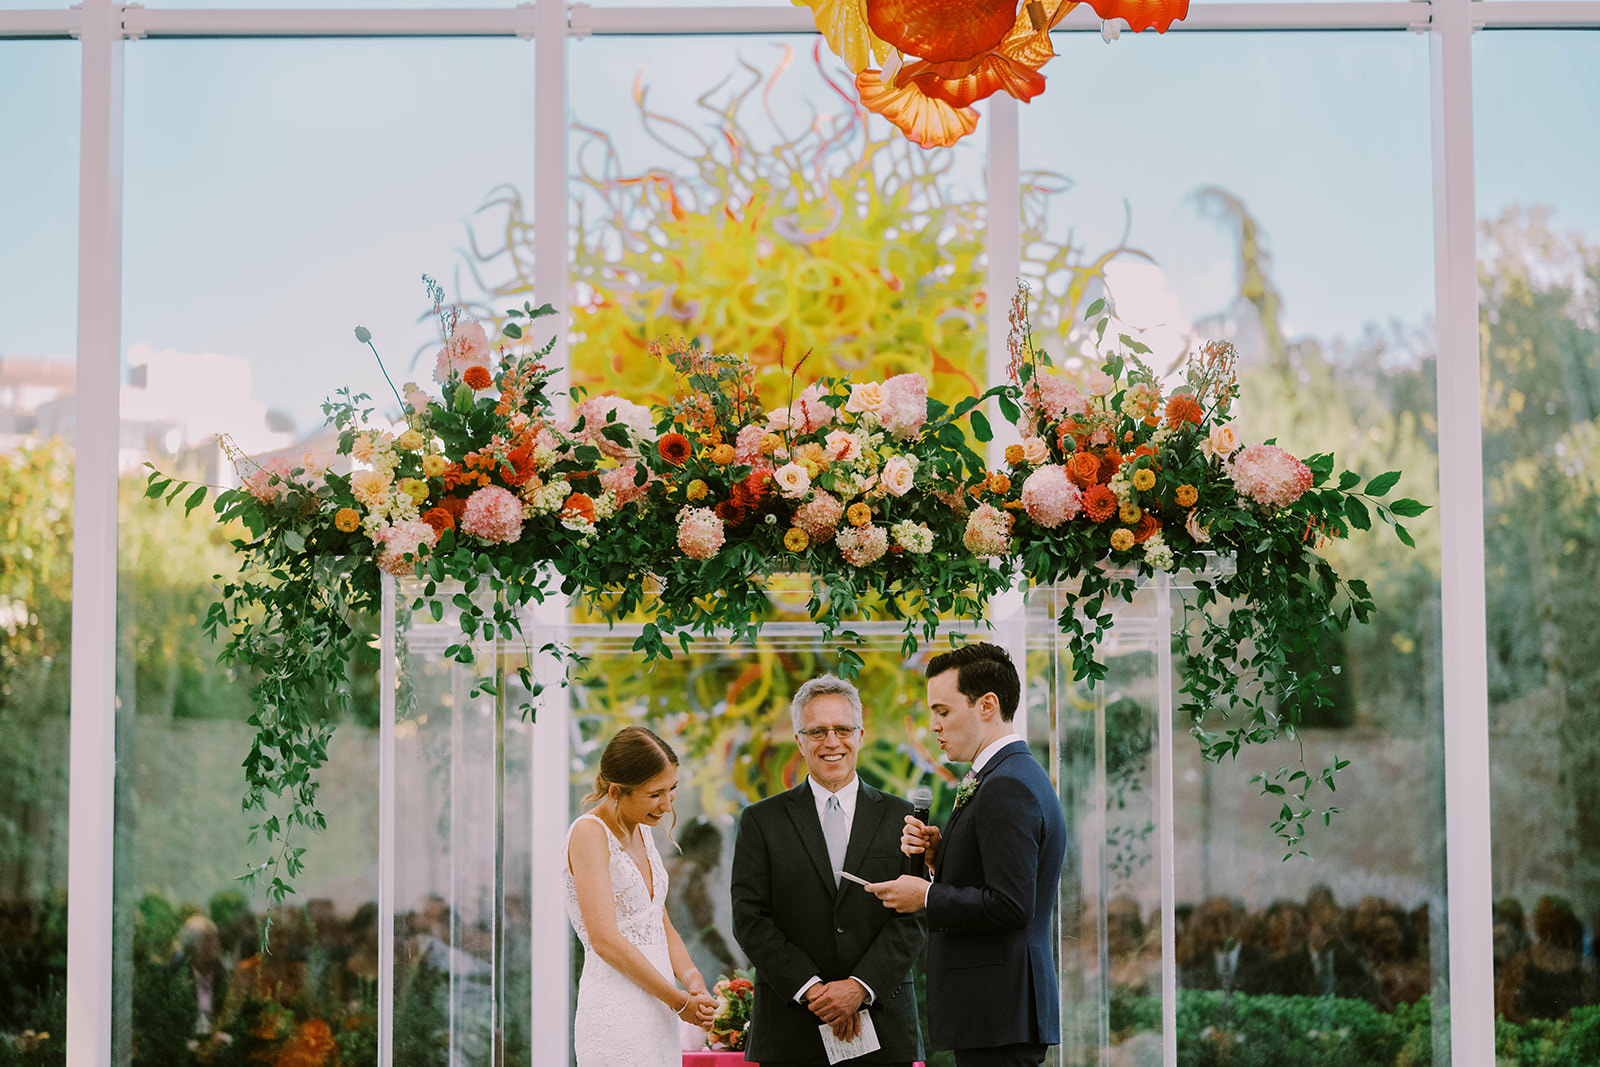 Emily & Will Chihuly Garden & Glass wedding photographed by Brandon Patoc of JENN TAI & CO